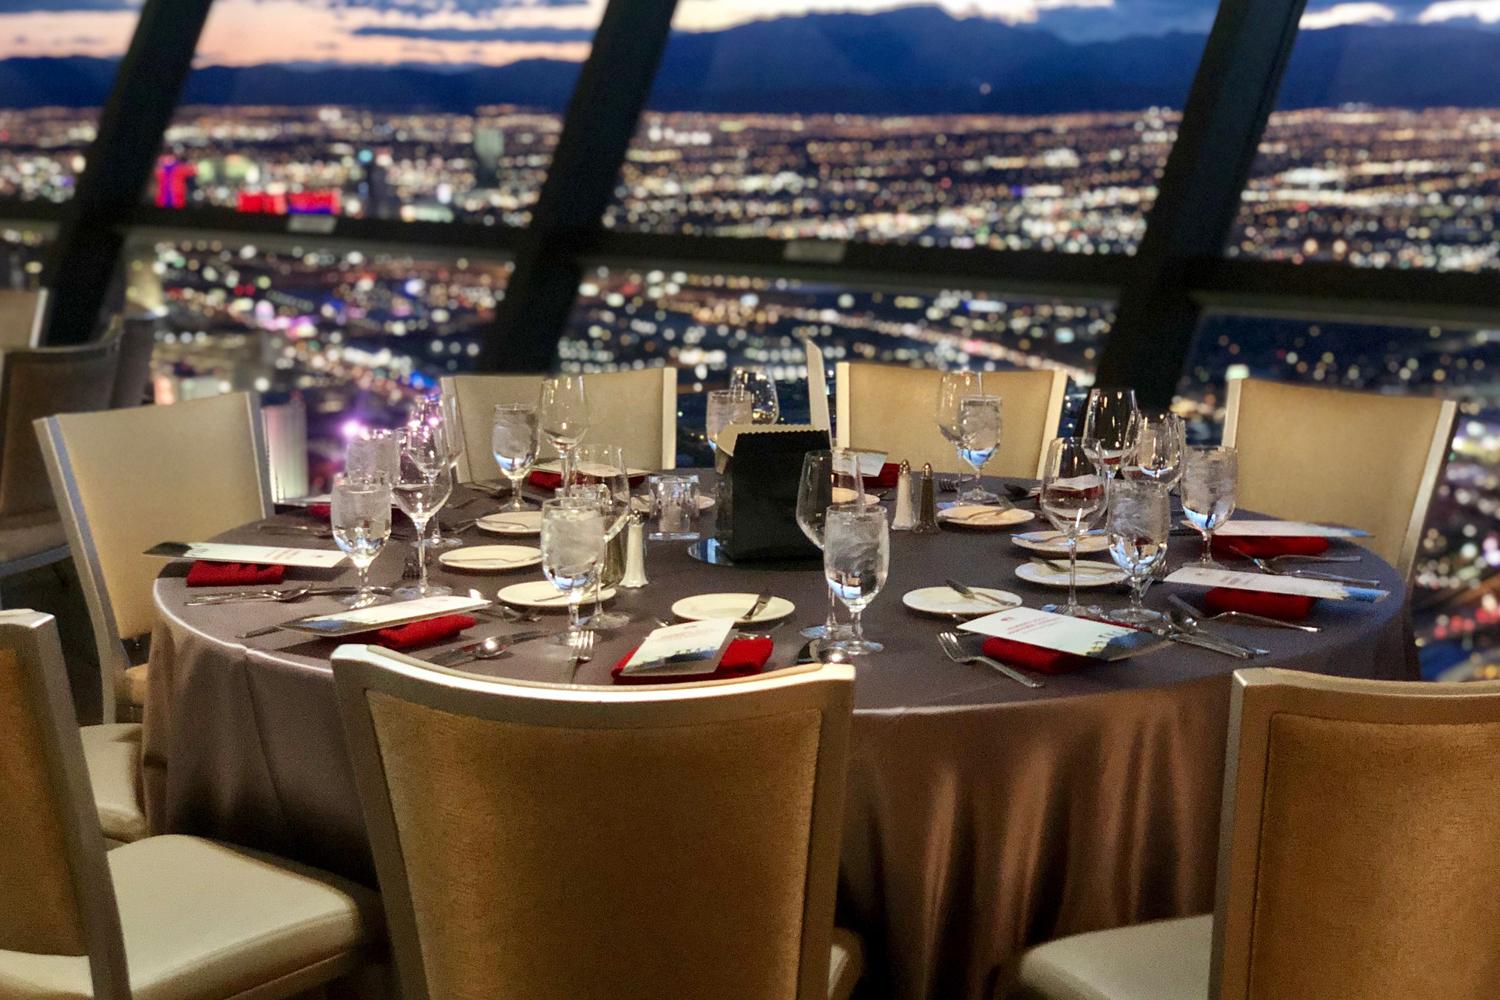 The STRAT SkyPod observation deck table set for a private dinner with a view of Las Vegas valley